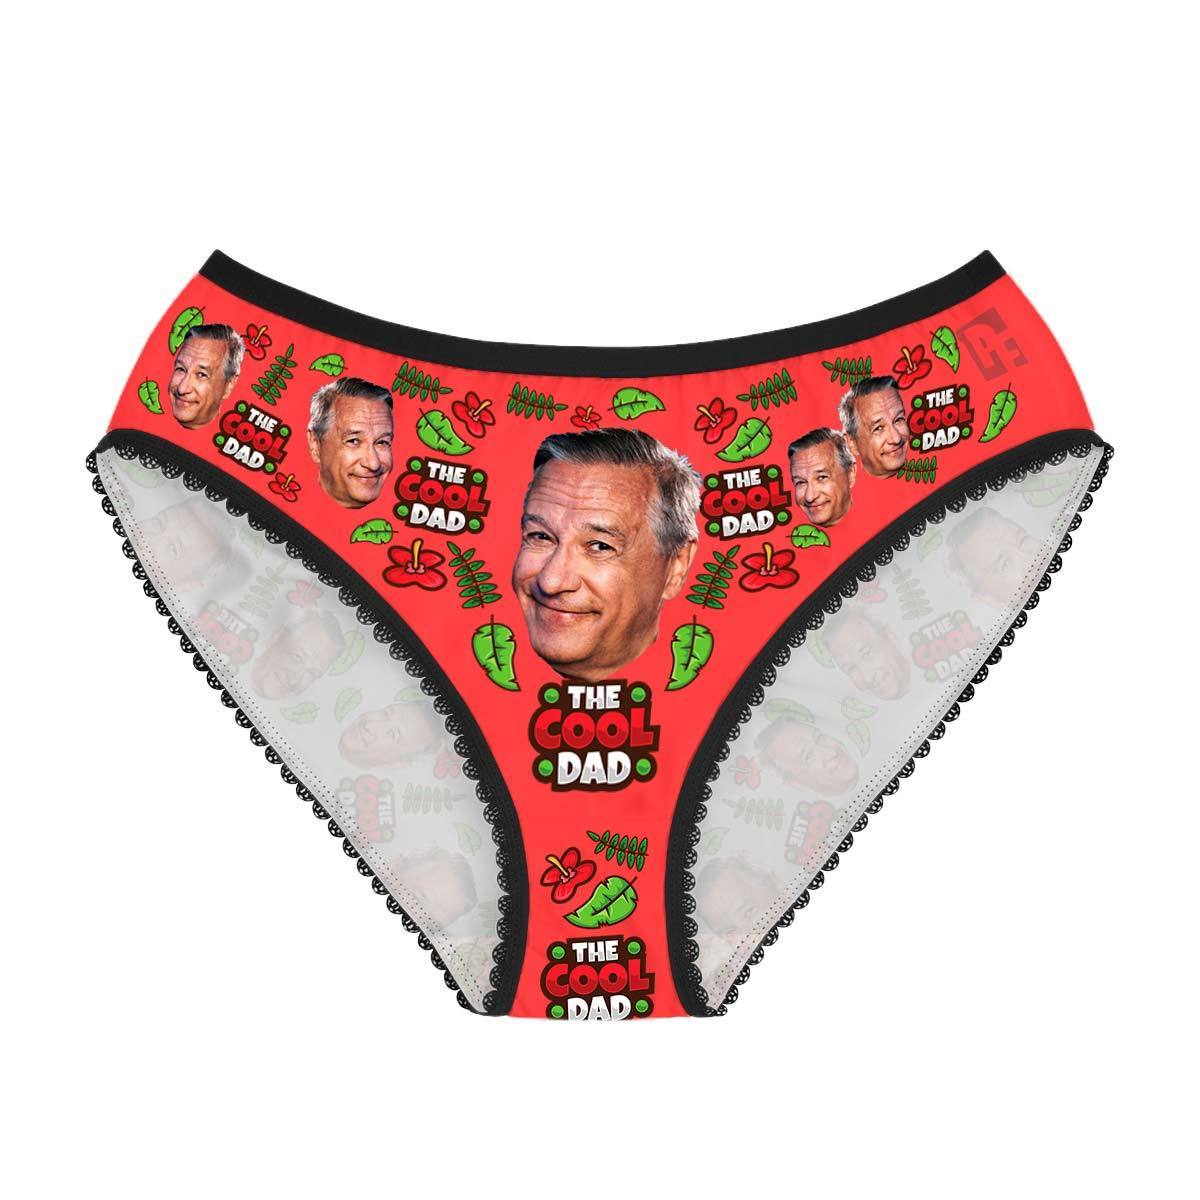 Red The cool dad women's underwear briefs personalized with photo printed on them